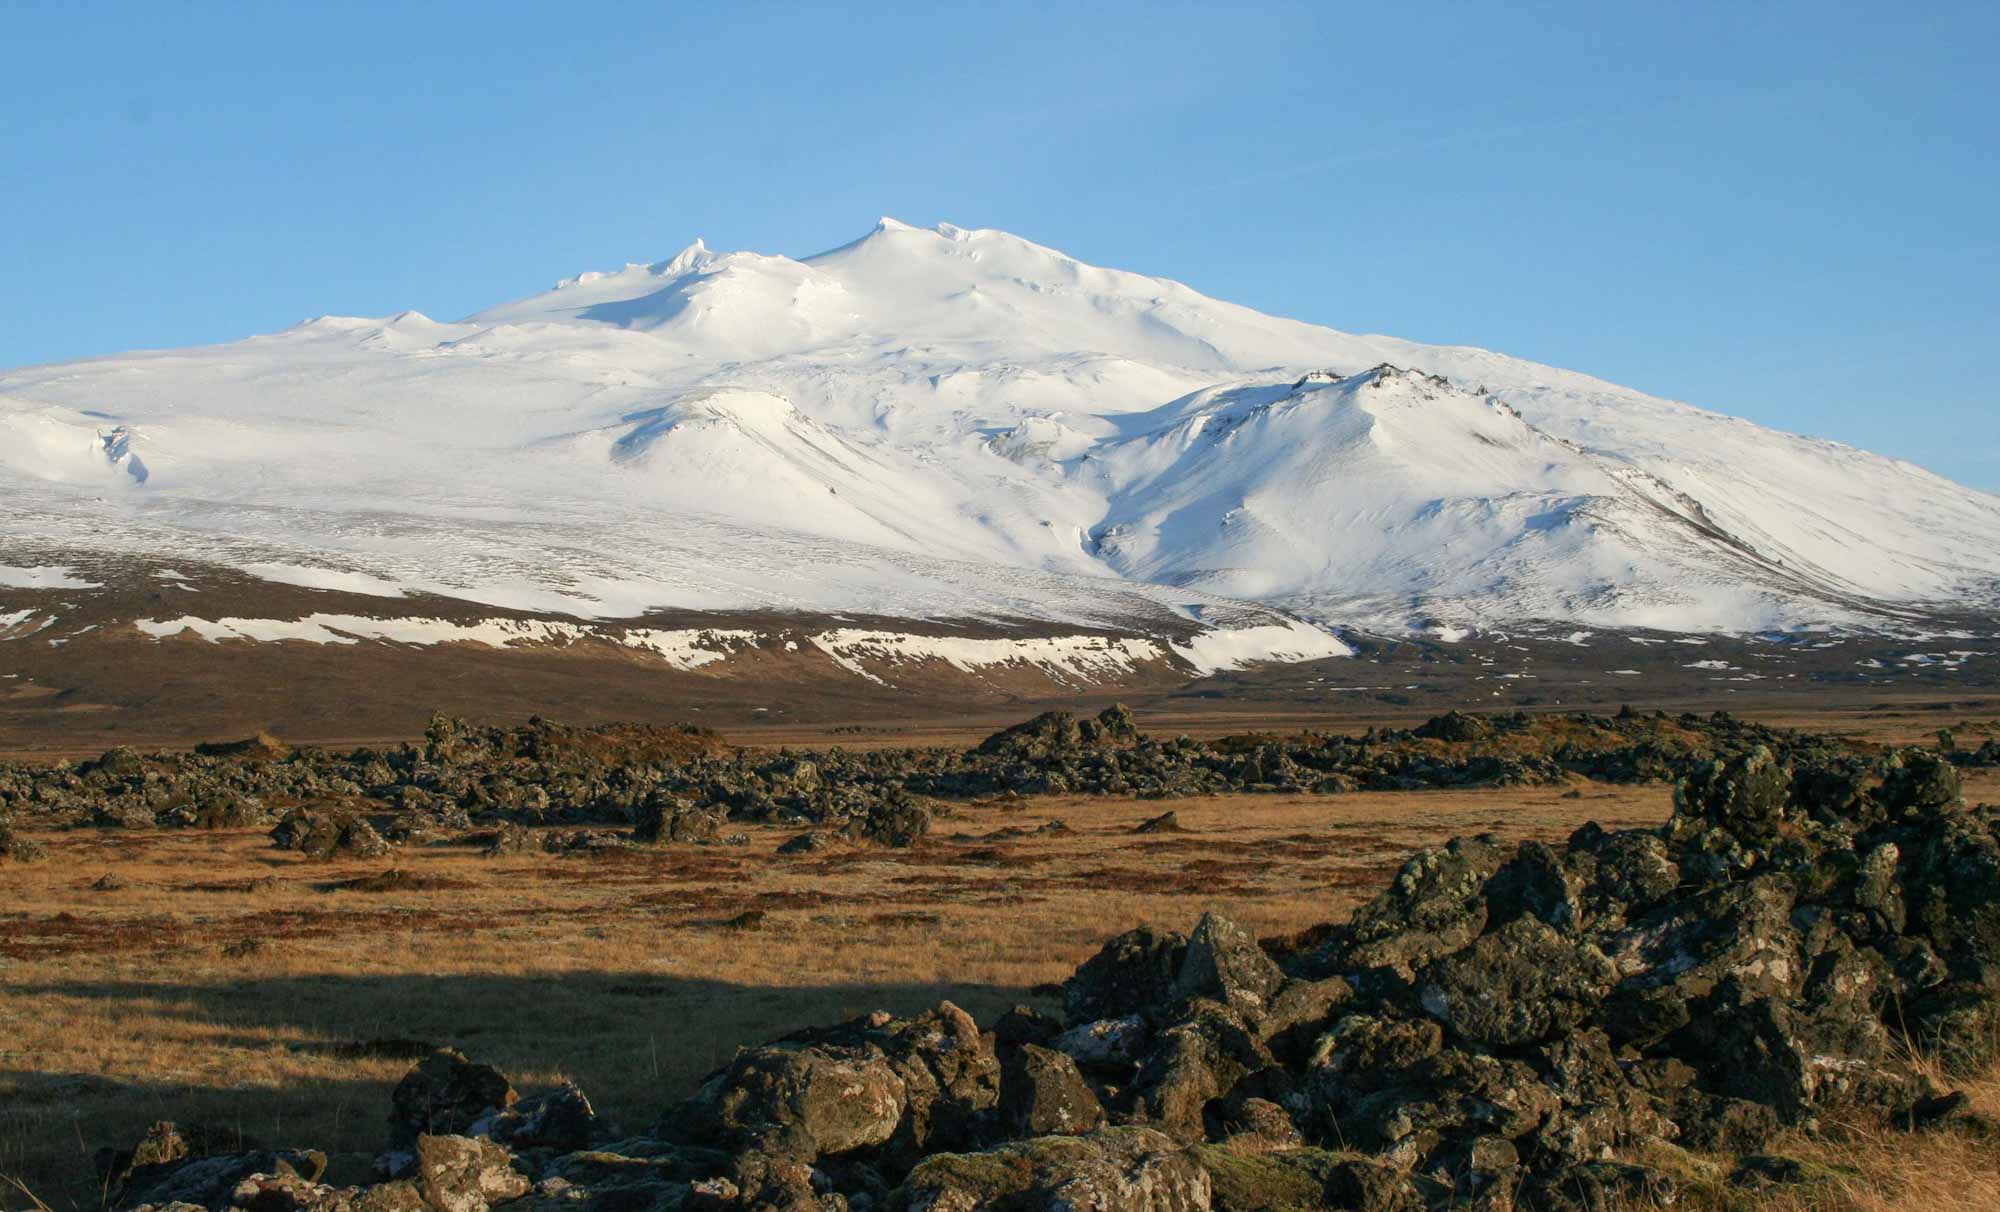 The peak of Snæfellsjökull volcano, Iceland, covered in snow, with granite rocks in the foreground